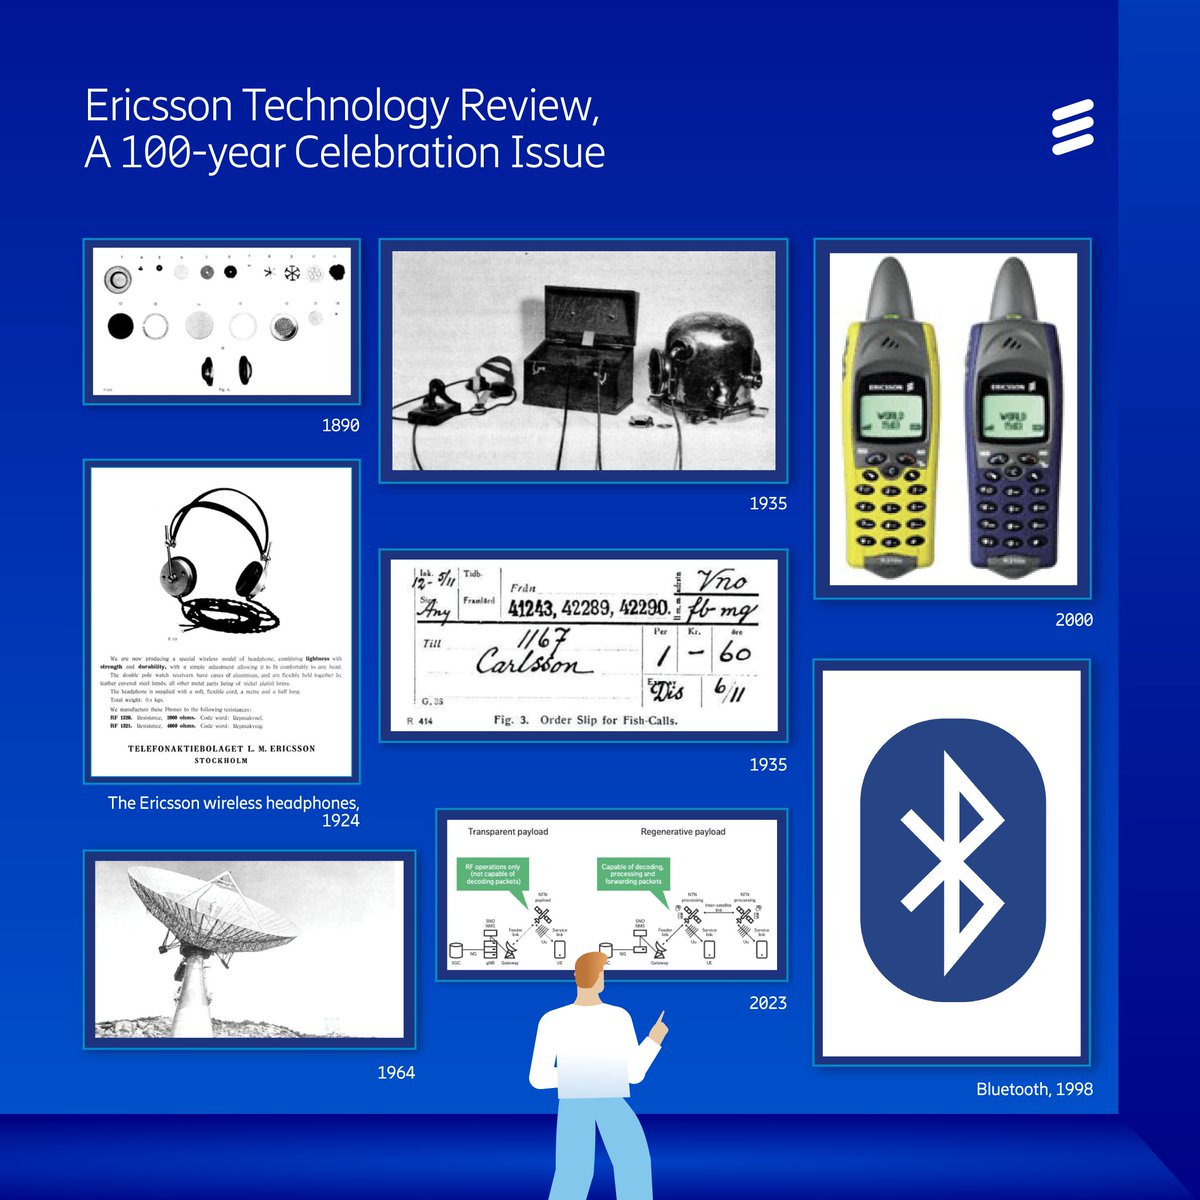 For a century, the #EricssonTechnologyReview (ETR) has been sharing ideas and visions that have shaped the development of #MobileInternet. 

Join us in celebrating 100 years of ETR. 

Read it here: m.eric.sn/nC4I50R6lOR